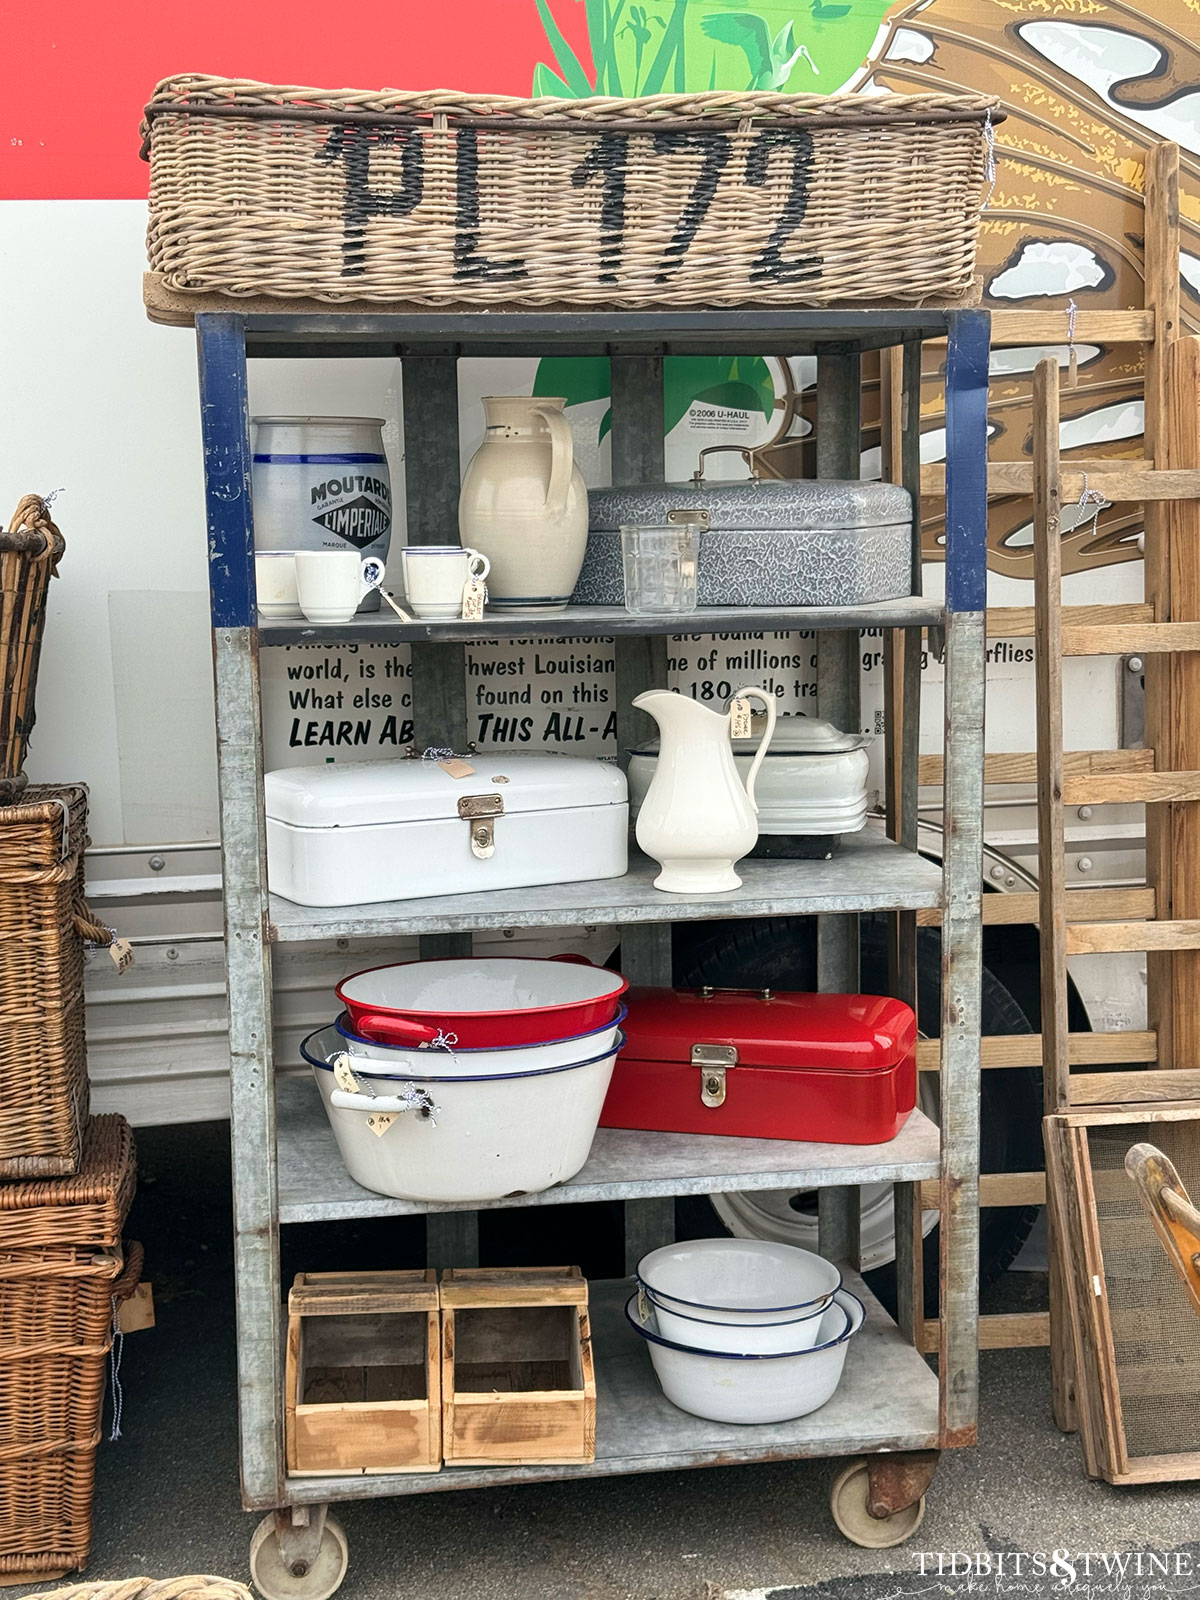 metal rolling shelves holding enamel bowls, ironstone and an oversize basket at an antique fair